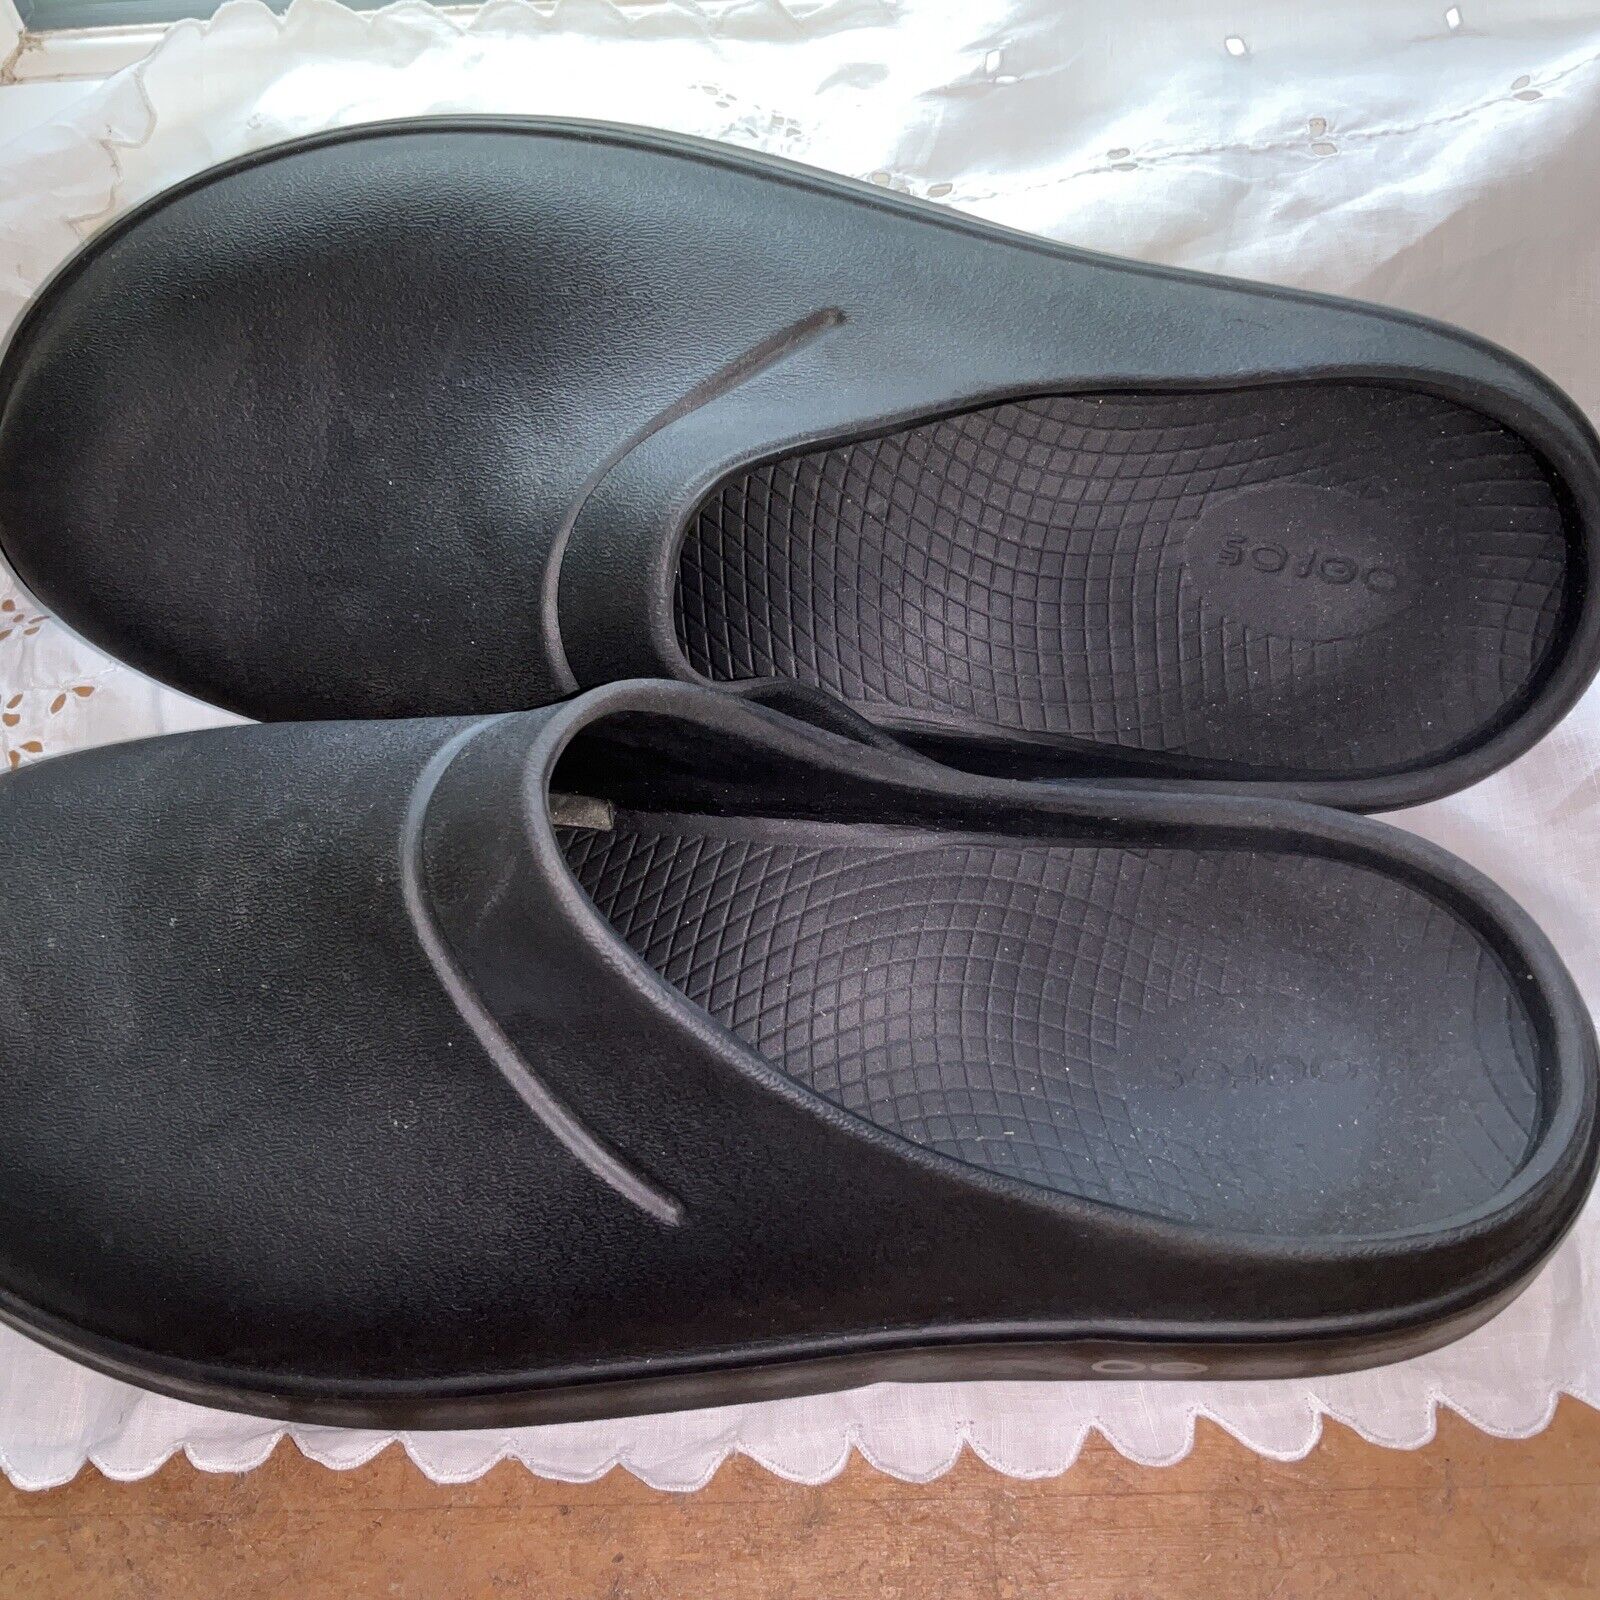 OOFOS OOCloog Recovery Clog Black Slip On Clogs Size Men 6 Women 8  848282001441